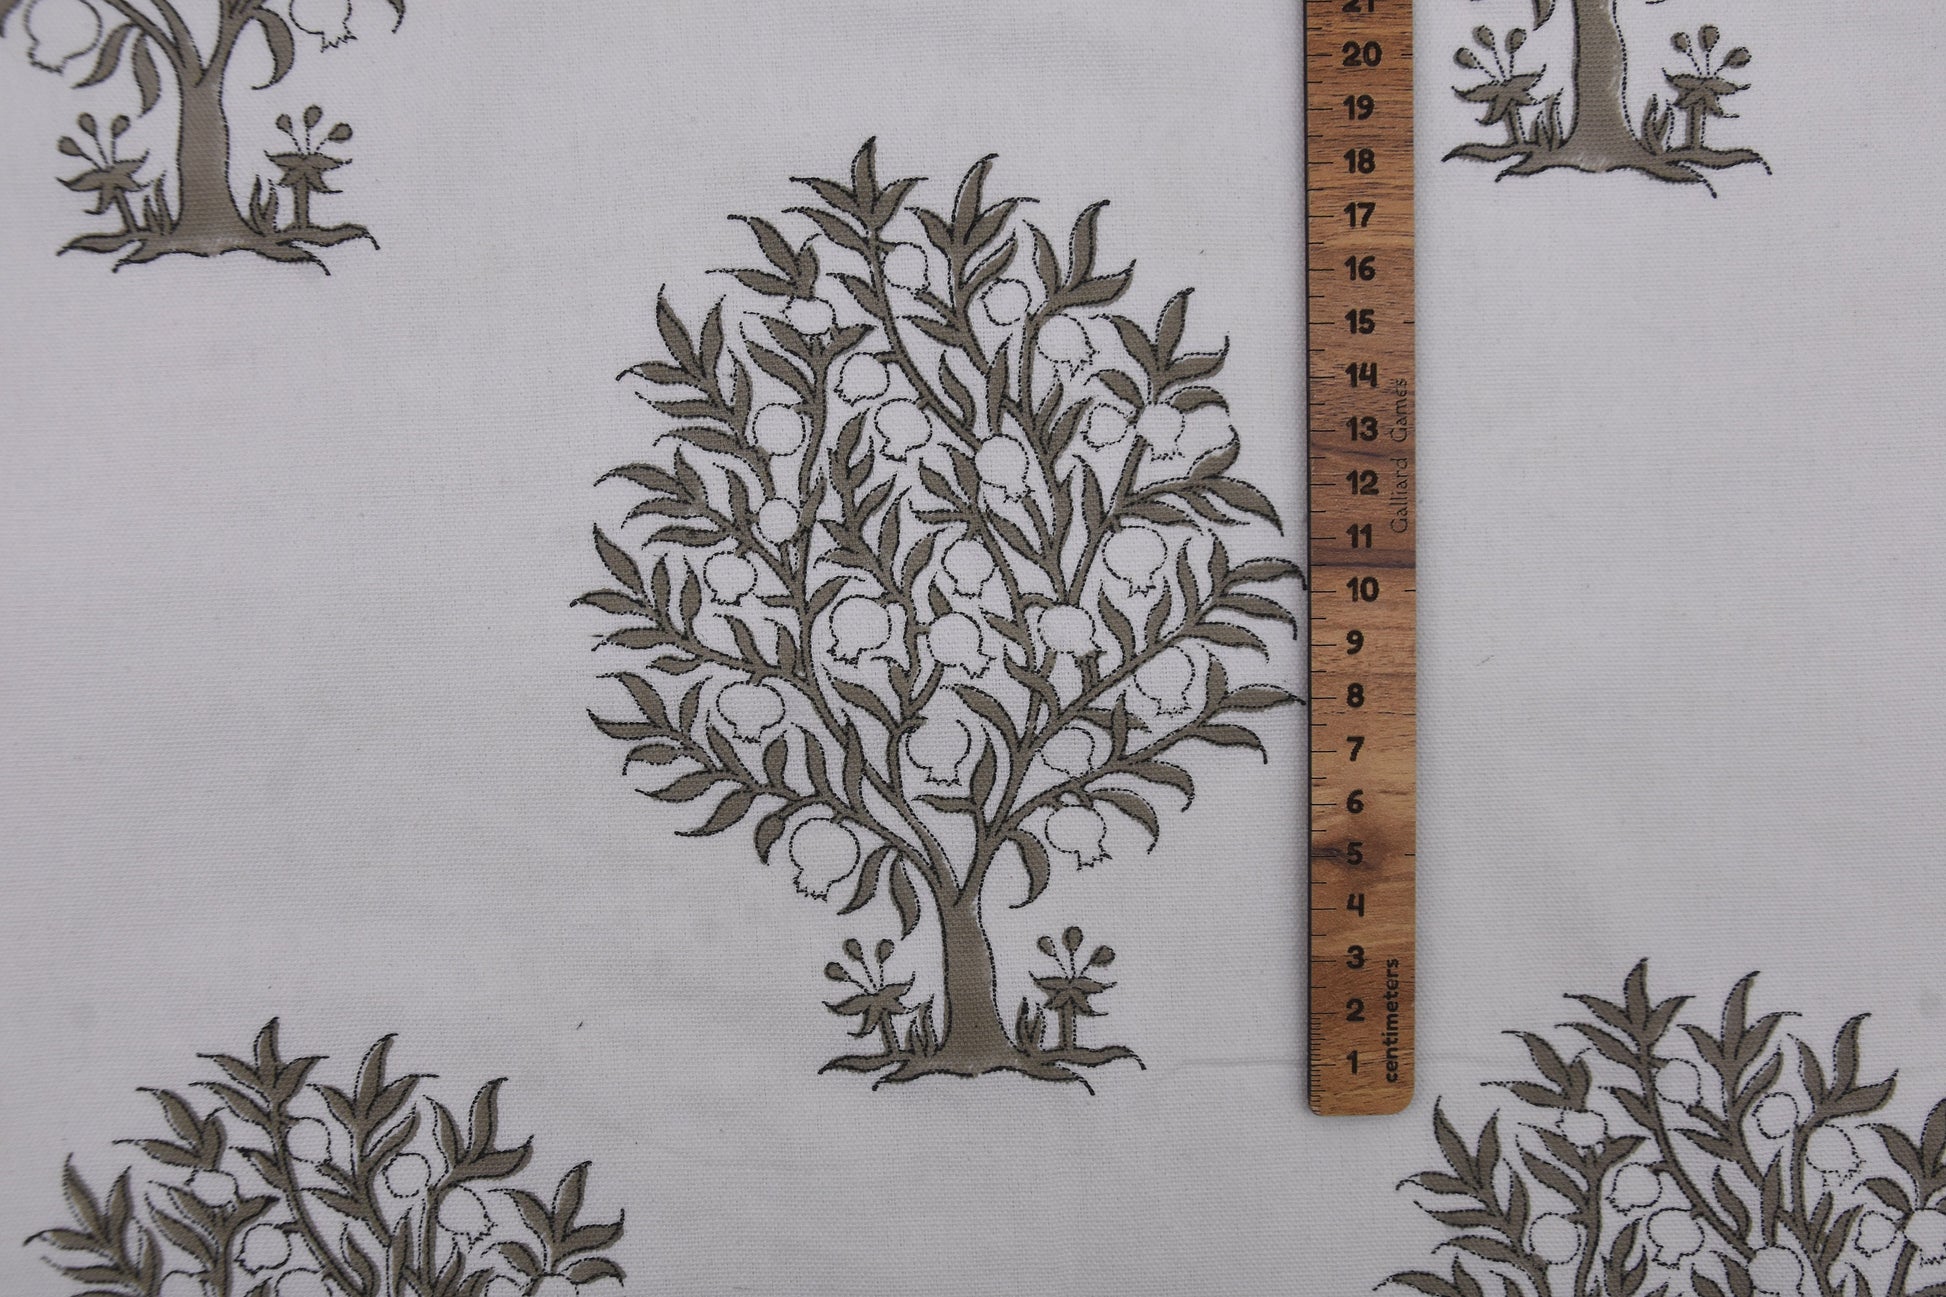 Block print Thick Cotton White 63" wide, Curtains for home, Indian fabric, handmade tree printed fabric - ANAR